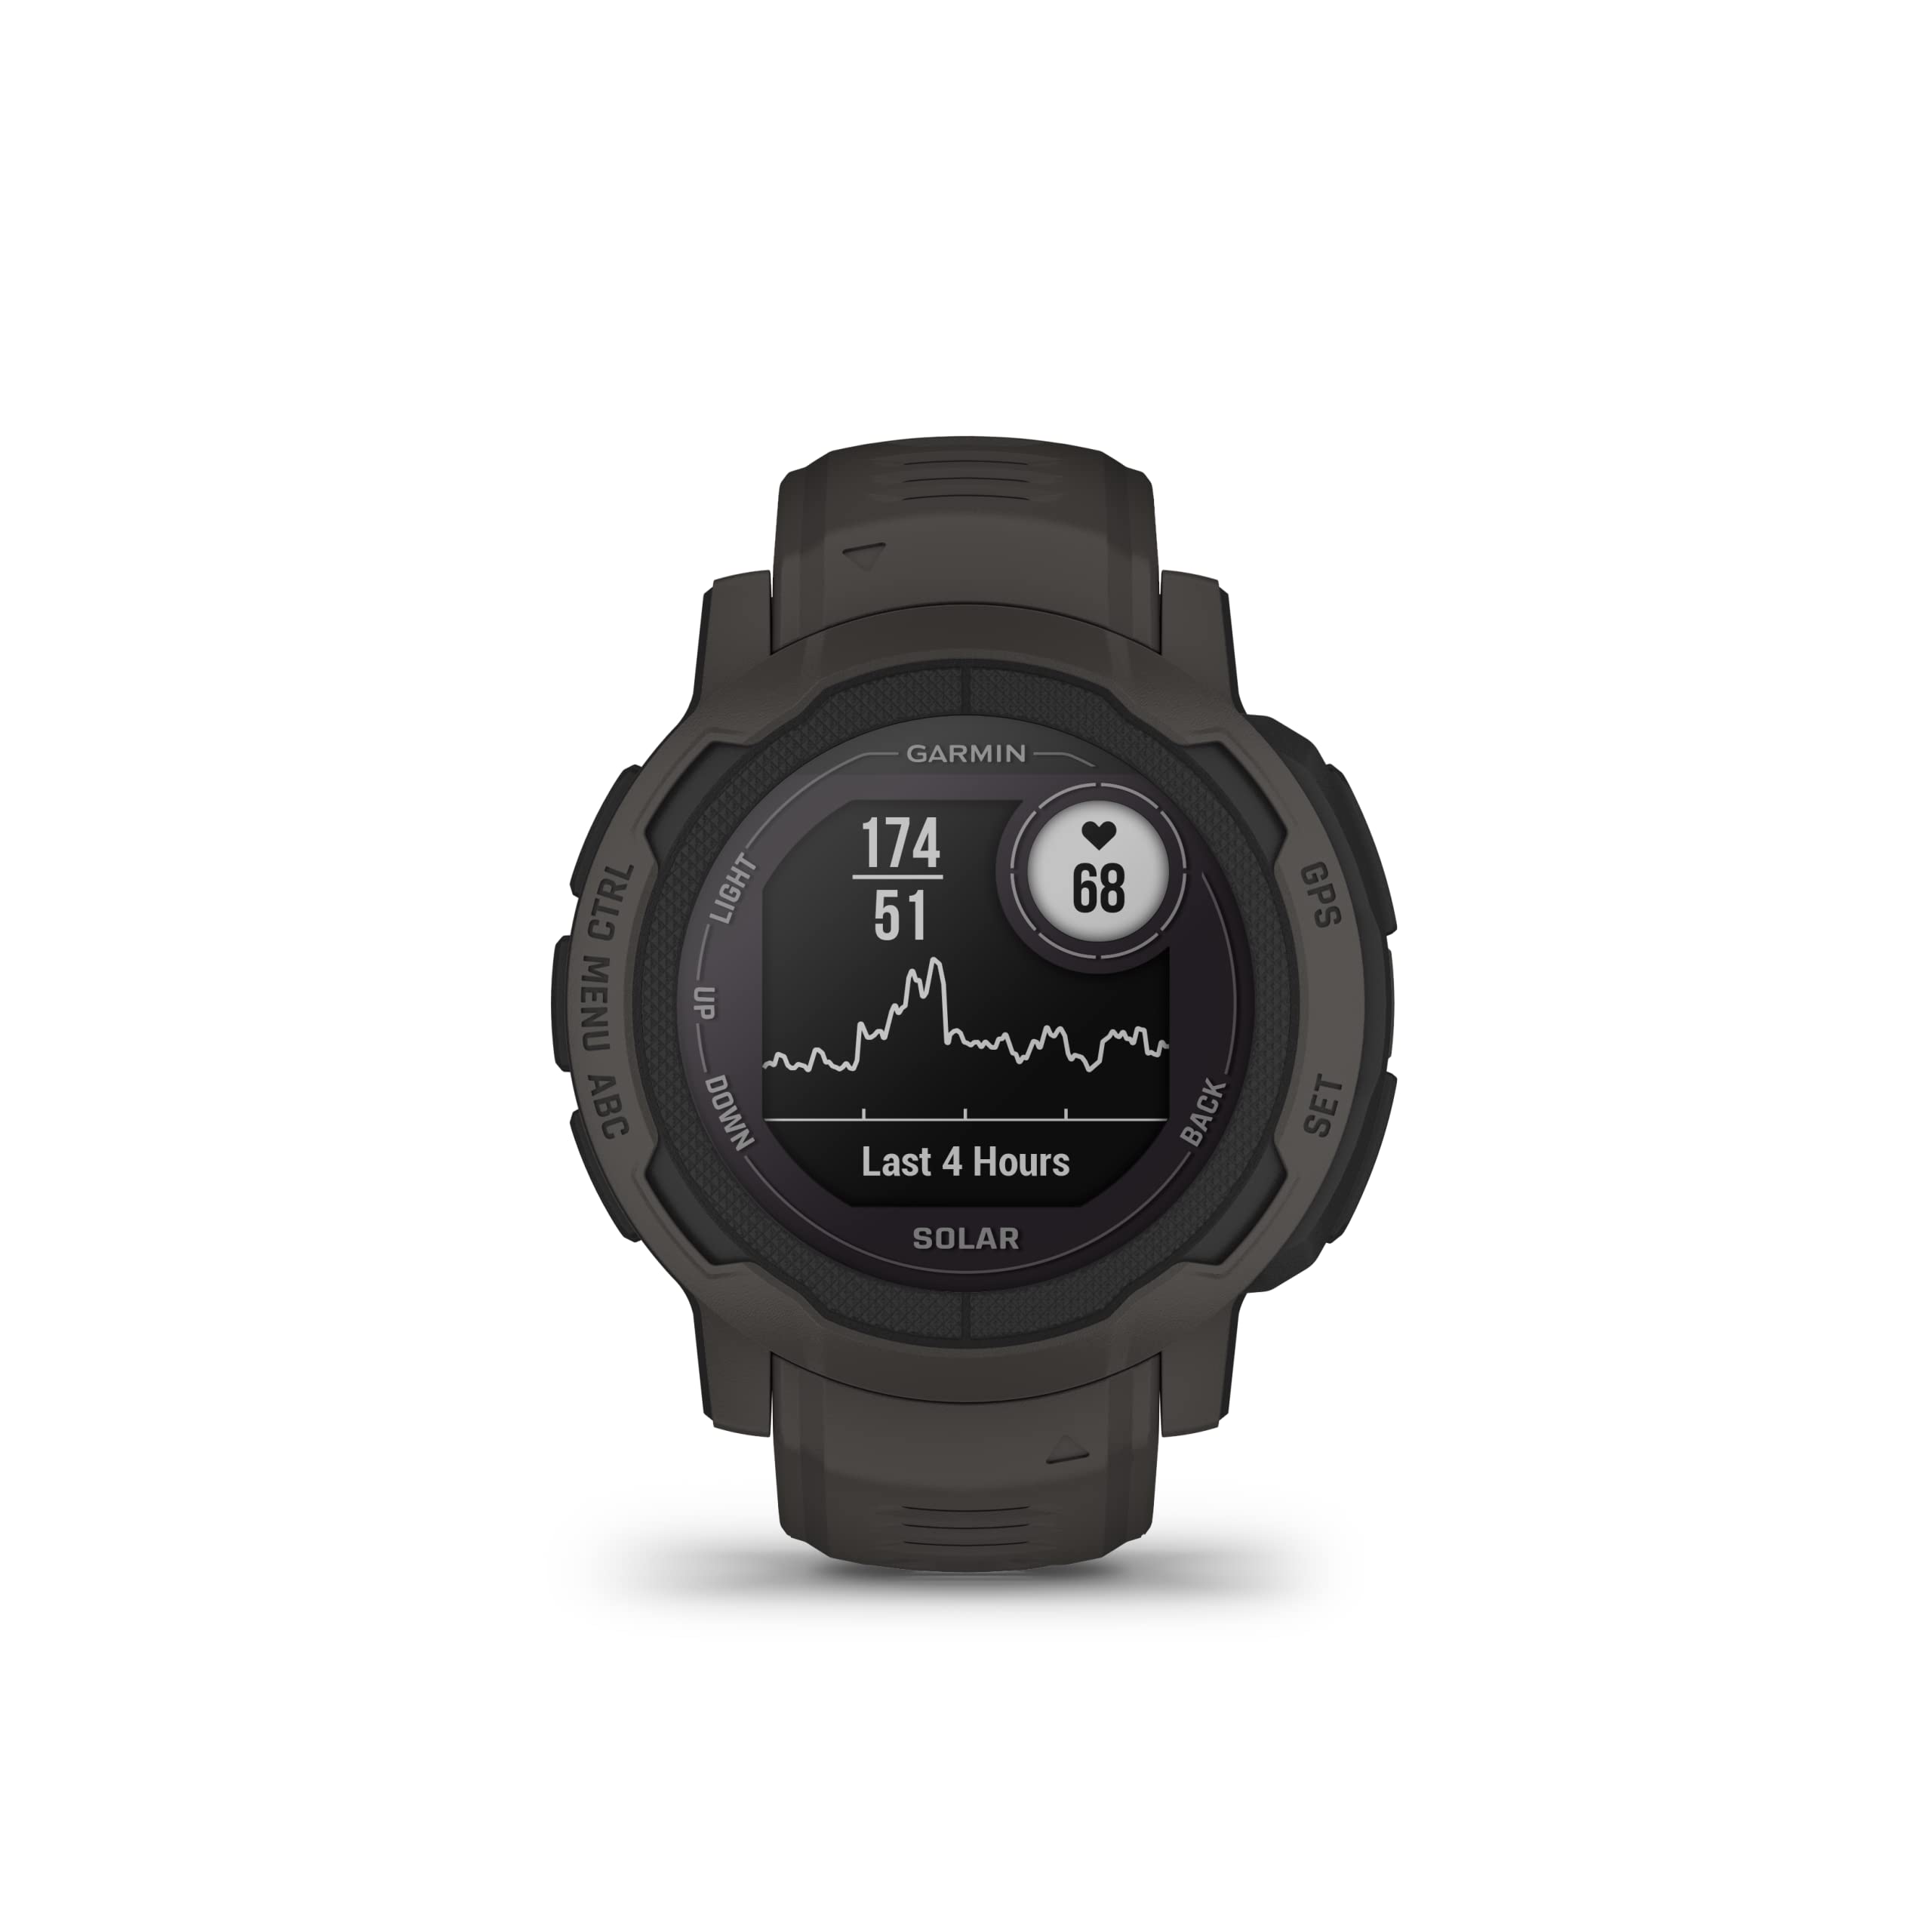 Garmin Instinct 2, Rugged Outdoor Watch with GPS, Built for All Elements, Multi-GNSS Support, Tracback Routing and More, Graphite